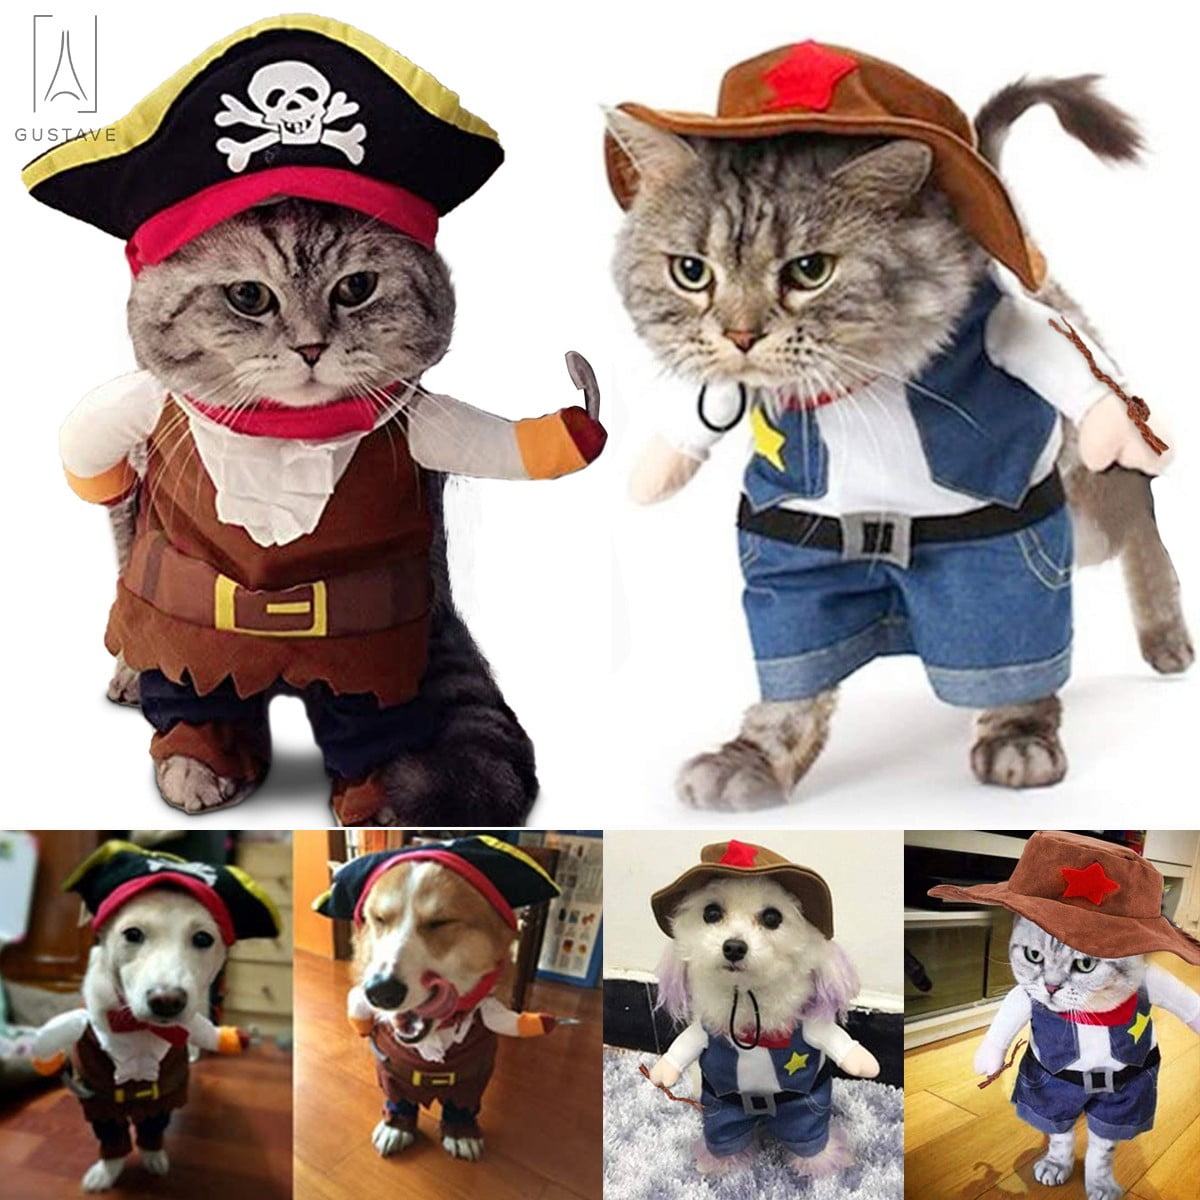 Gustavedesign Halloween Dog Cat Costume Suit Caribbean Pirate Pet Clothes For Small Dogs Cats Dressing Up Party Apparel Clothing Caribbean Pirate L Size Walmart Com